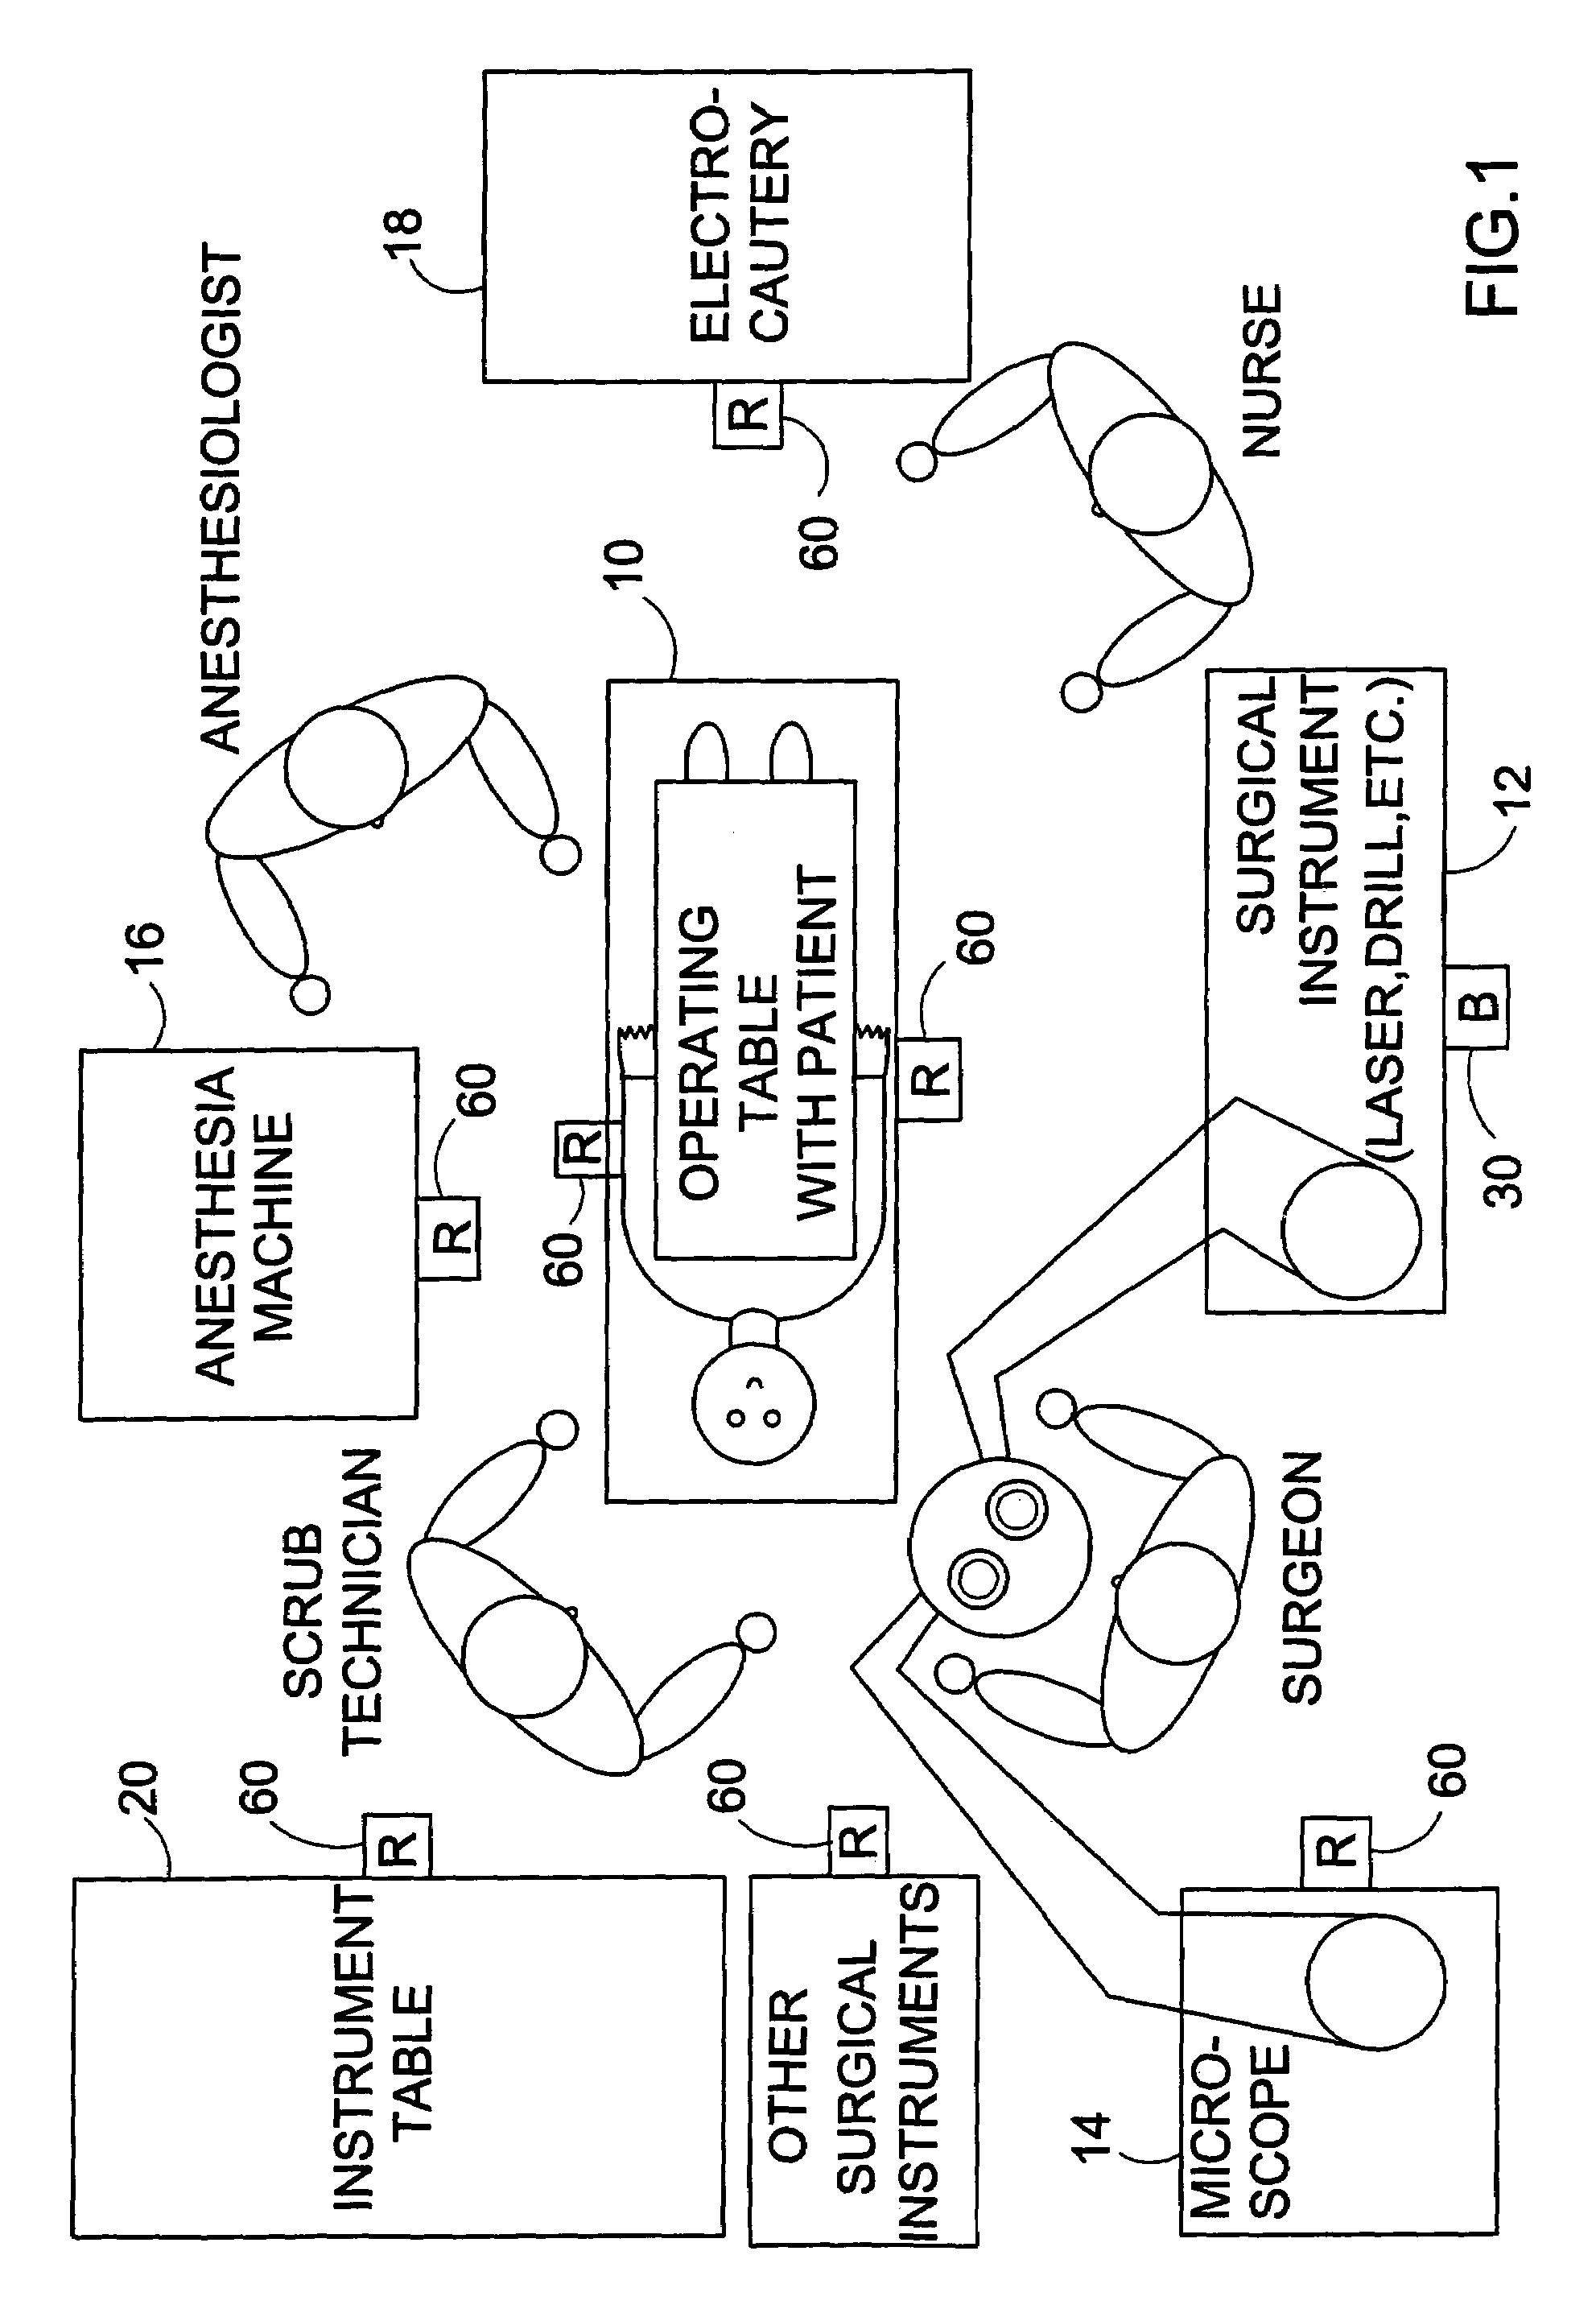 Medical surgery safety device